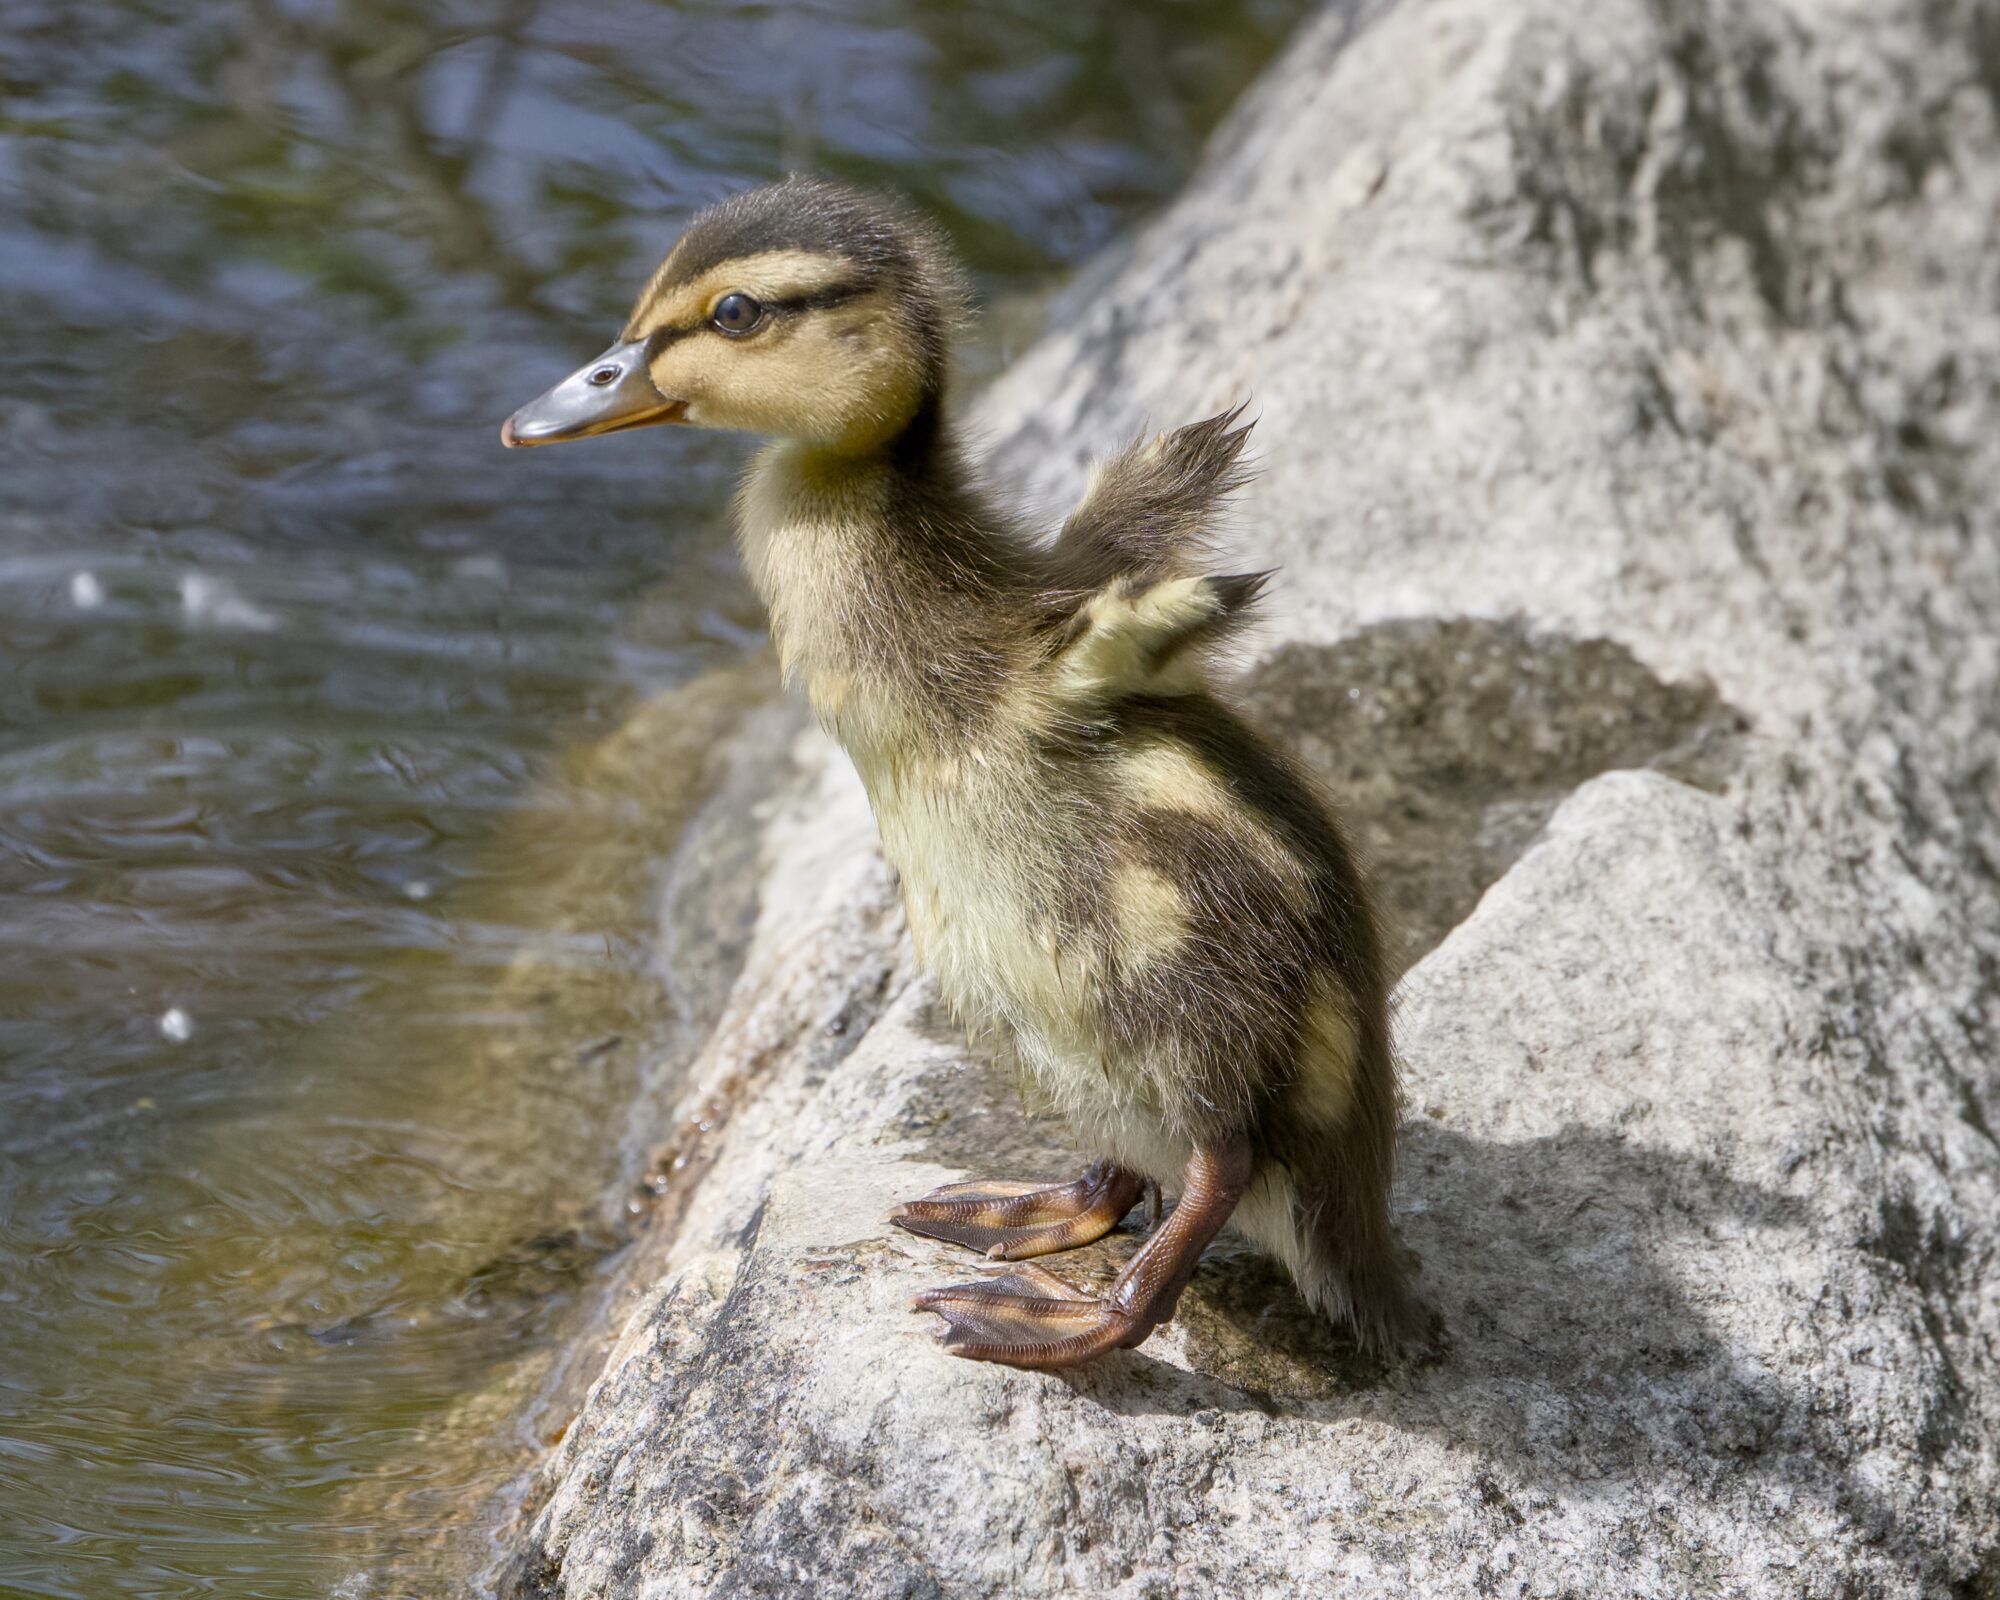 A Mallard Duckling is standing up on a rock by the water, flapping its tiny wings